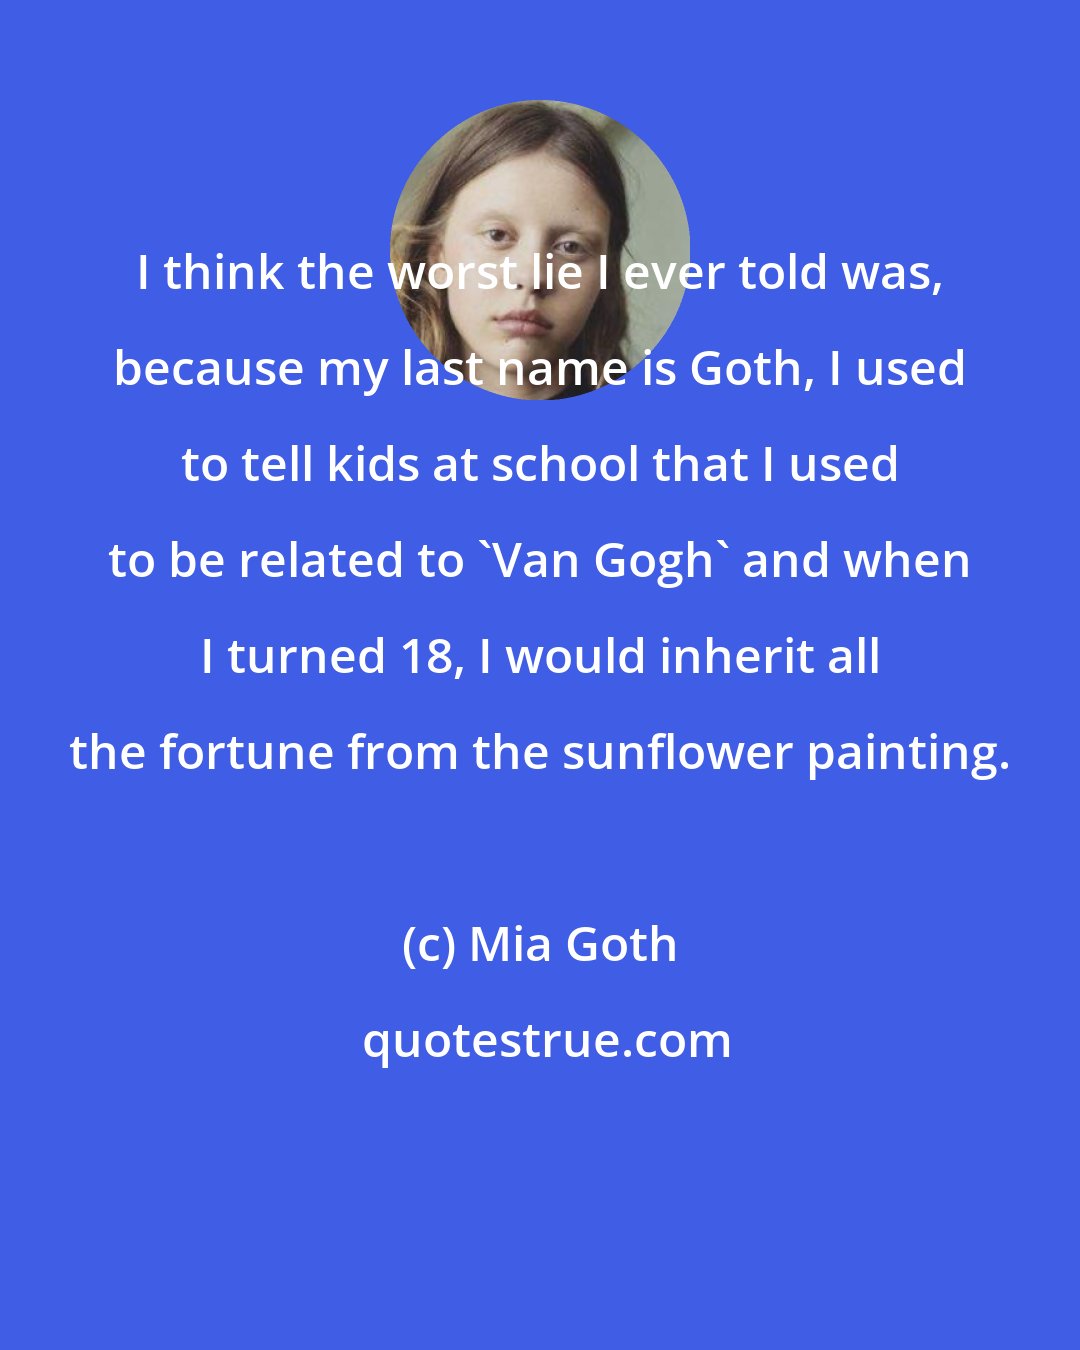 Mia Goth: I think the worst lie I ever told was, because my last name is Goth, I used to tell kids at school that I used to be related to 'Van Gogh' and when I turned 18, I would inherit all the fortune from the sunflower painting.